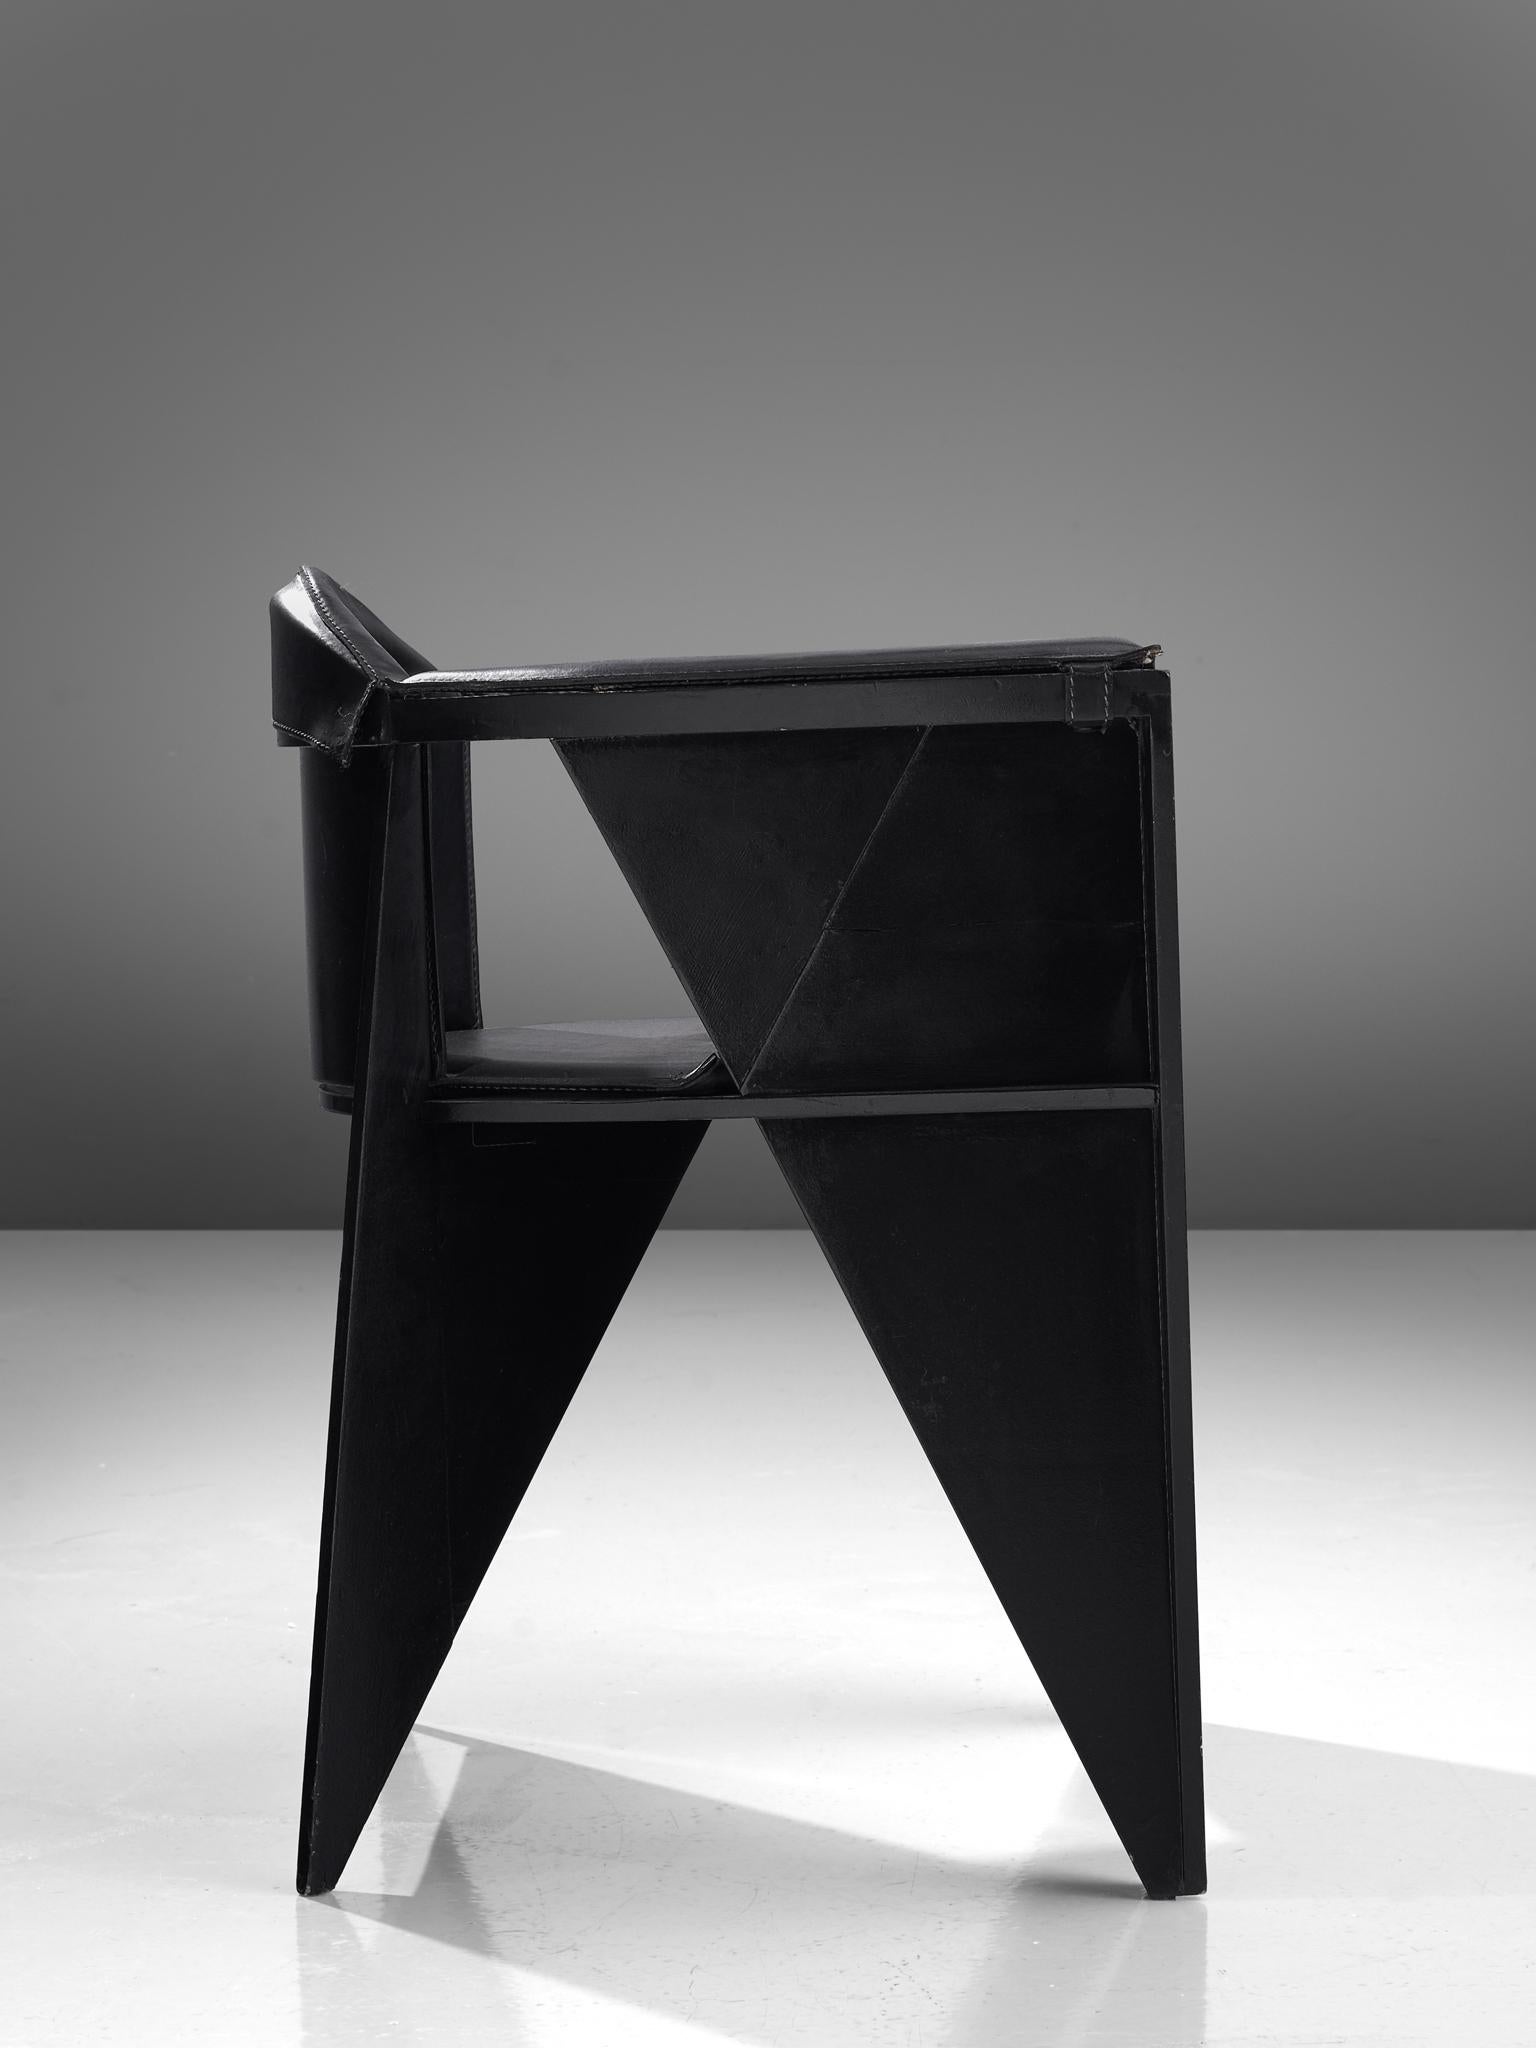 Adriano & Paolo Suman for Giorgetti Spa, armchair, lacquered beech and leather, Italy, 1984

Geometric Postmodern armchair designed by Adriano & Paolo Suman and manufactured by Giorgetti Spa. This model chair is from the Matrix series designed in